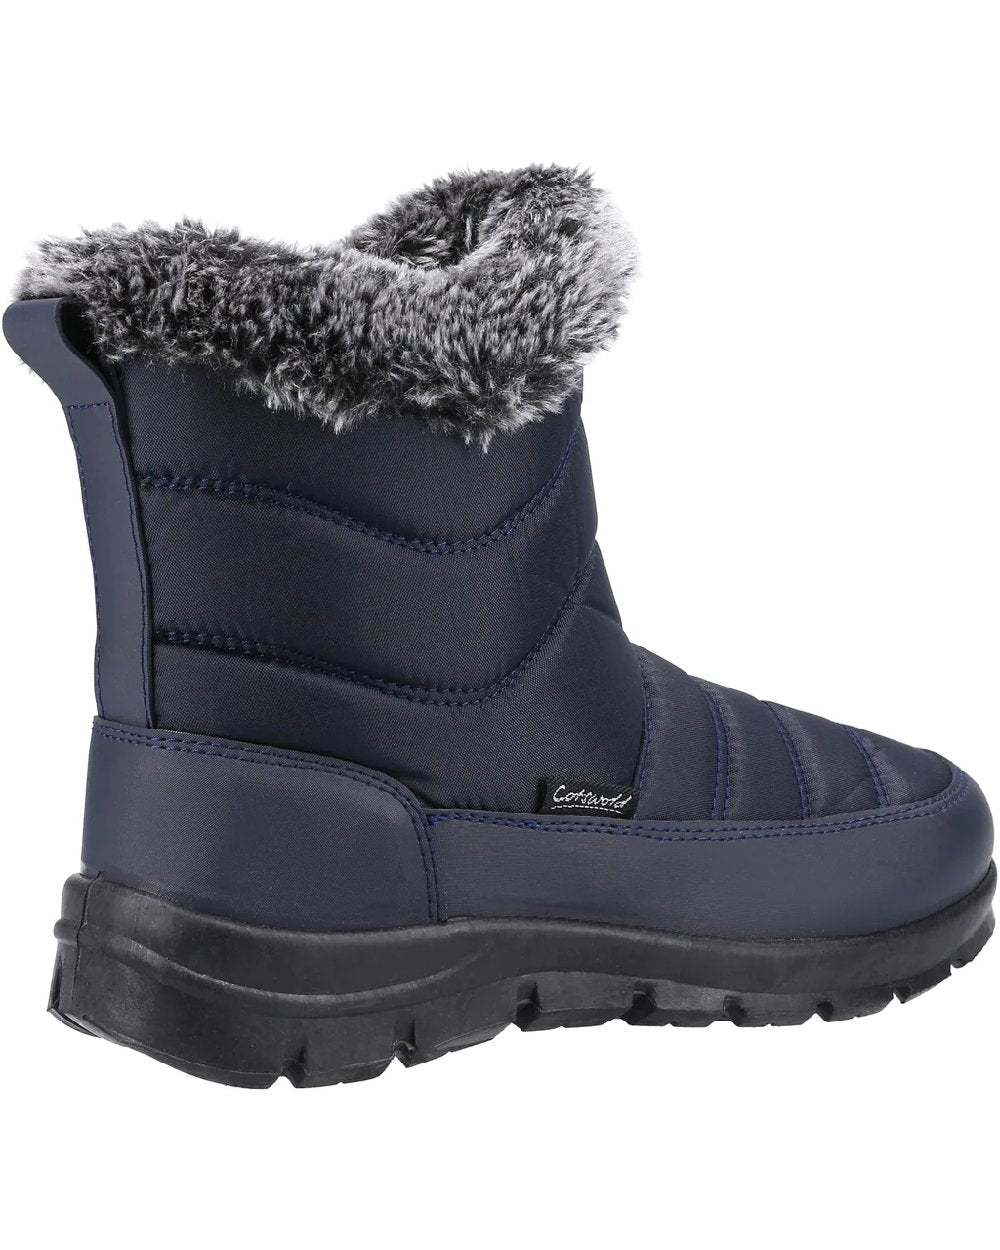 Cotswold Longleat Wellington Boots in Navy 